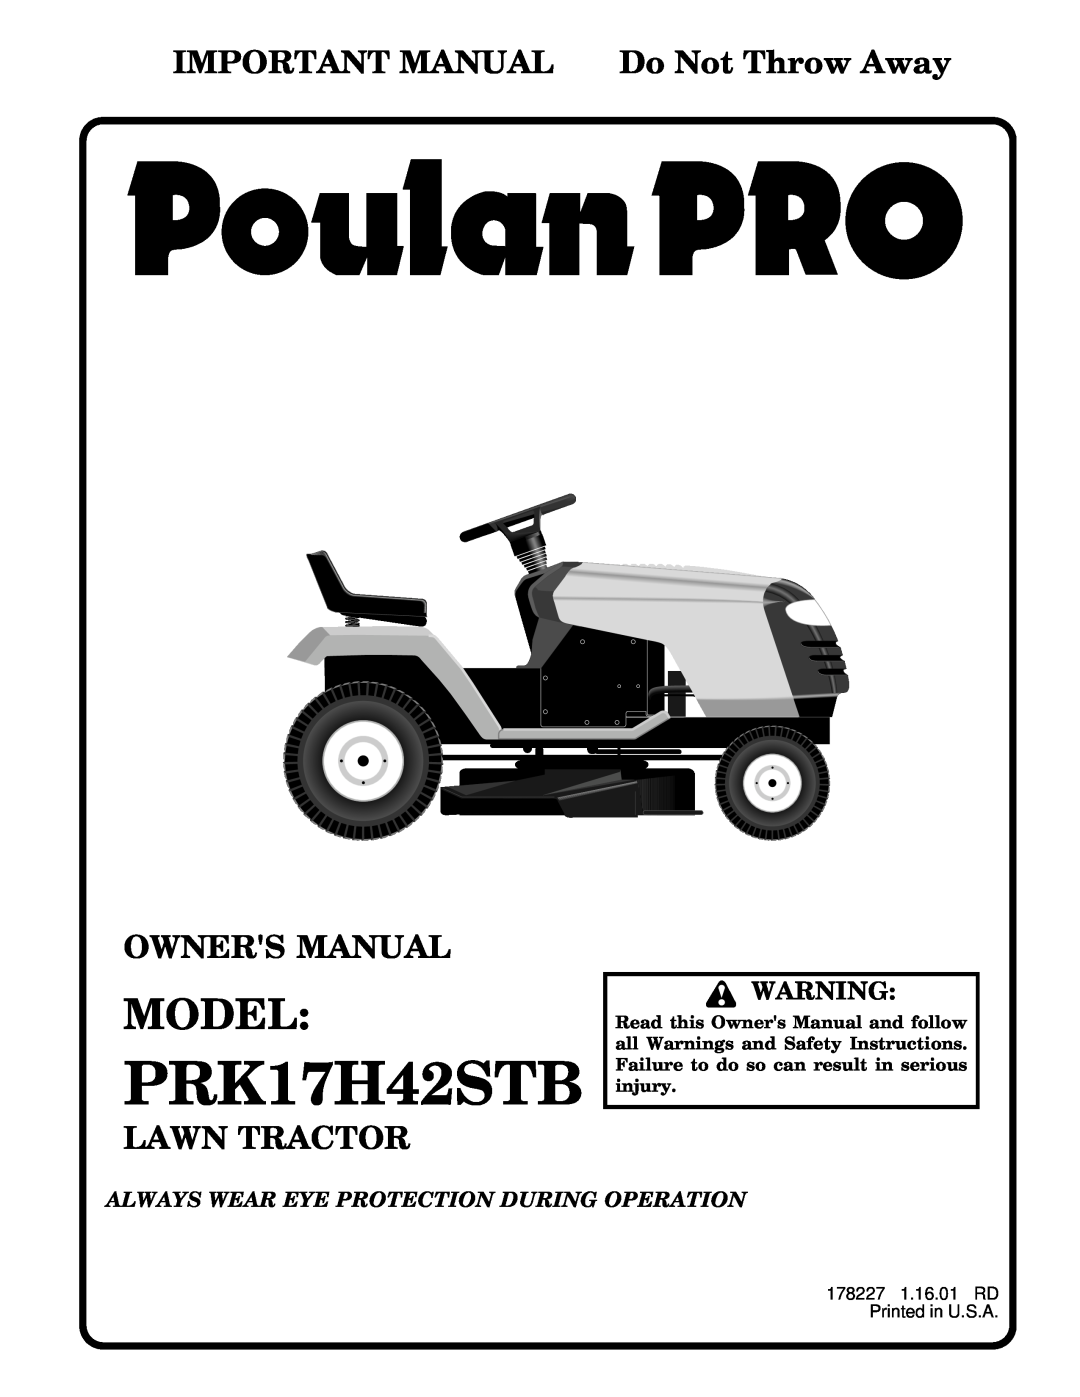 Poulan 178227 owner manual Model, PRK17H42STB, IMPORTANT MANUAL Do Not Throw Away, Owners Manual, Lawn Tractor 